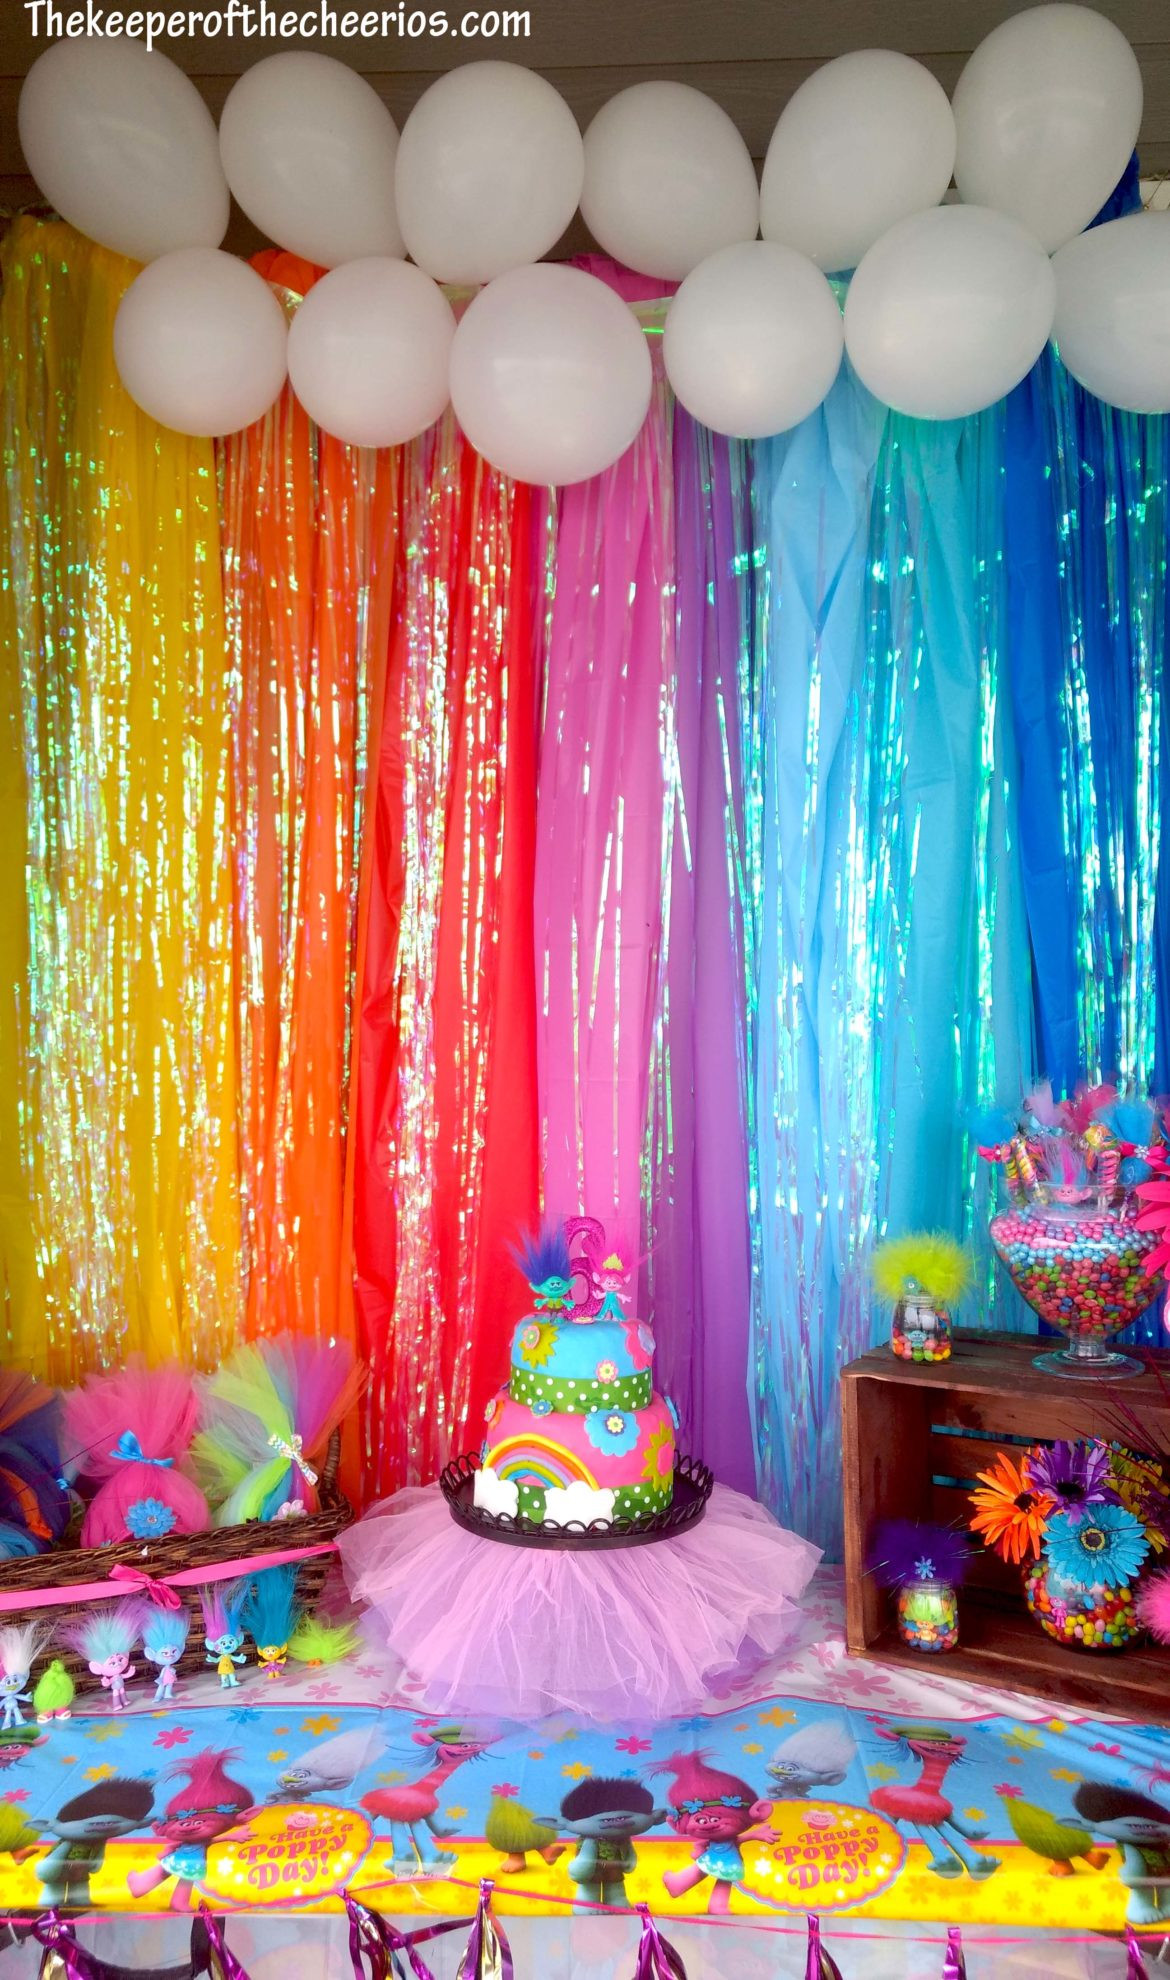 Trolls Party Ideas
 Trolls Birthday Party The Keeper of the Cheerios